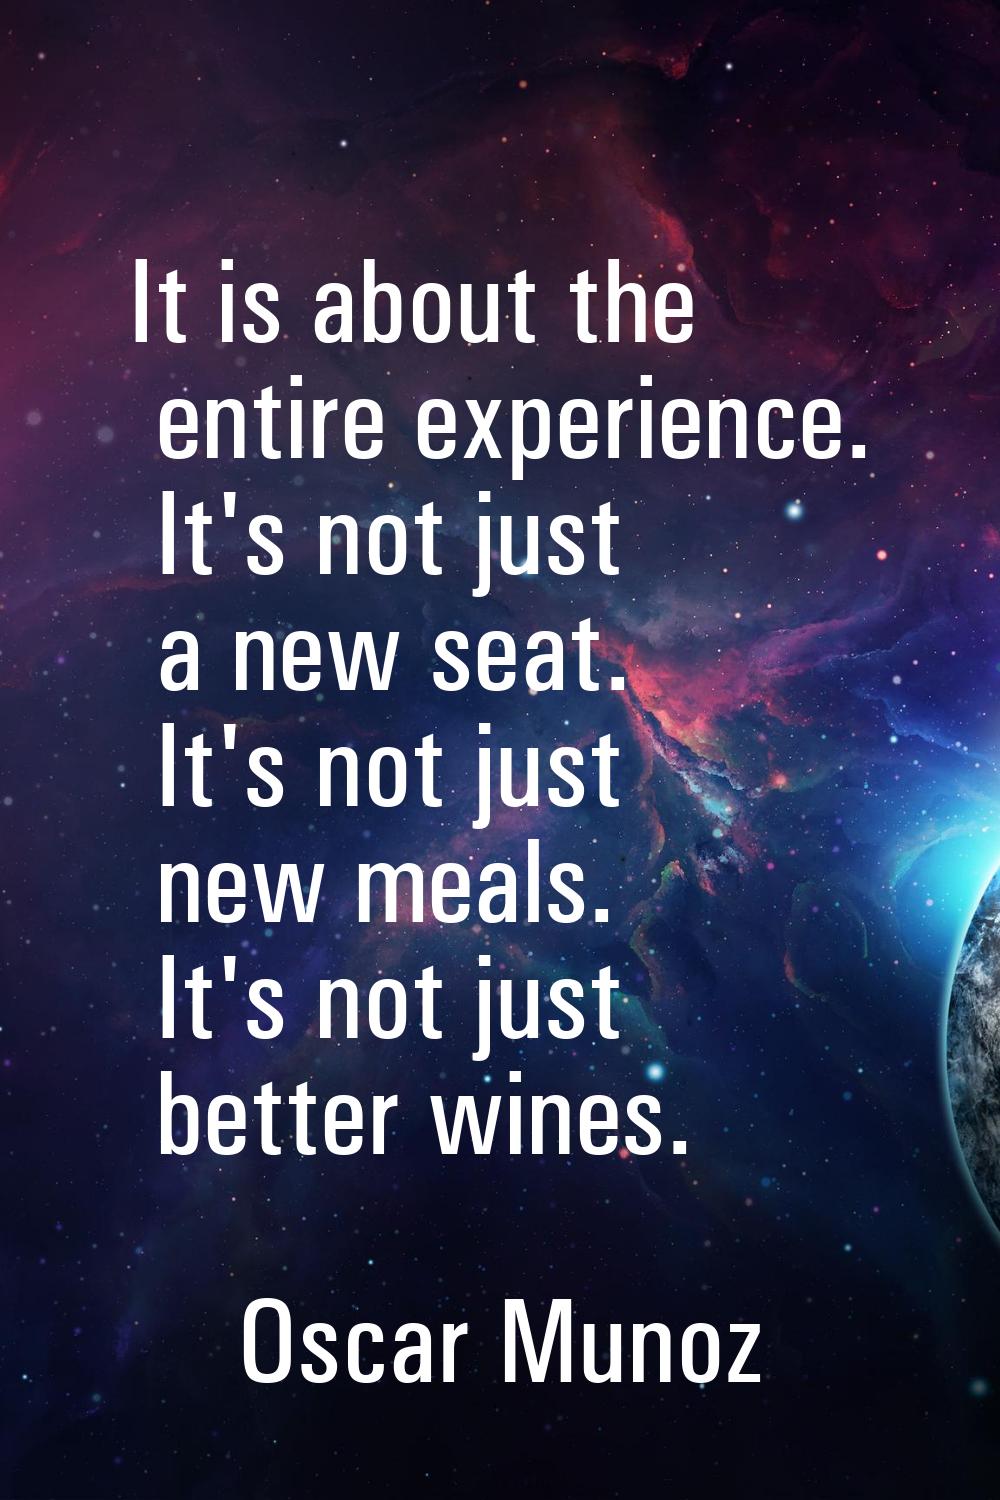 It is about the entire experience. It's not just a new seat. It's not just new meals. It's not just